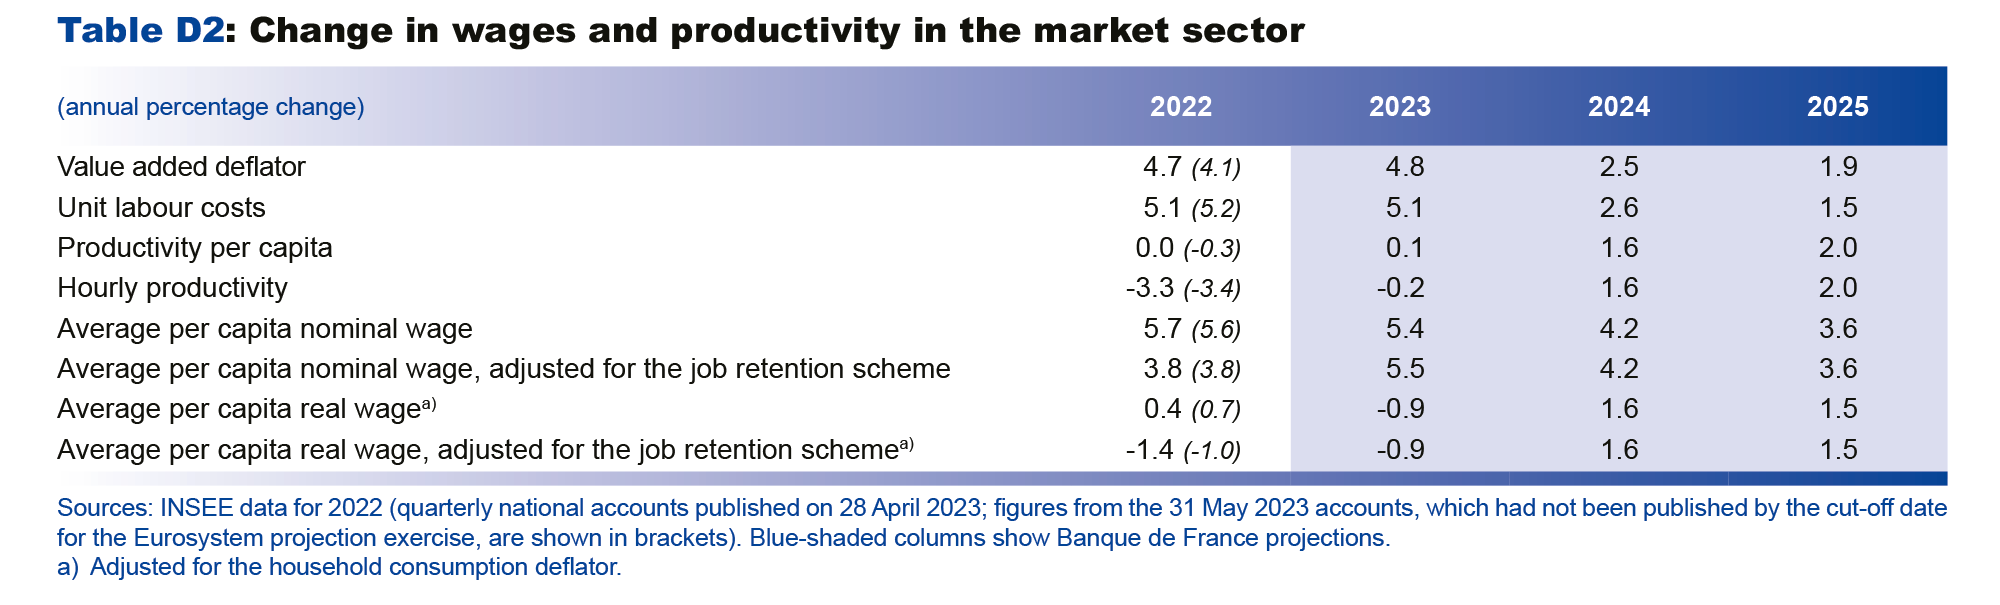 Change in wages and productivity in the market sector